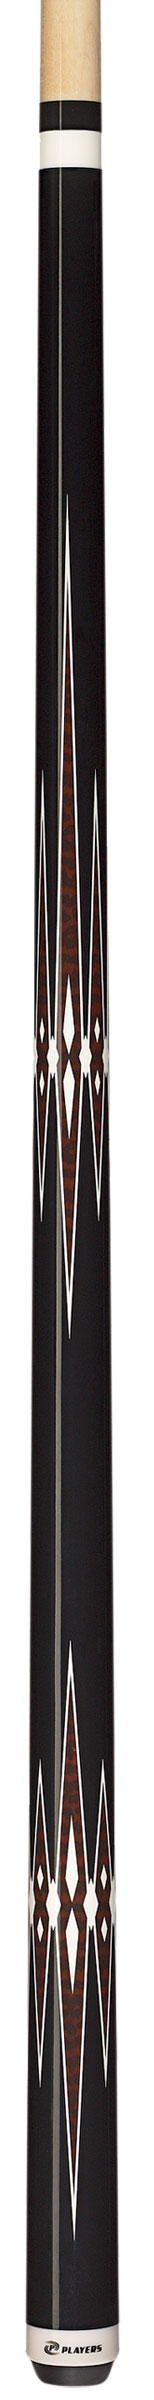 Pure X Technology HXT4 Pool Cue